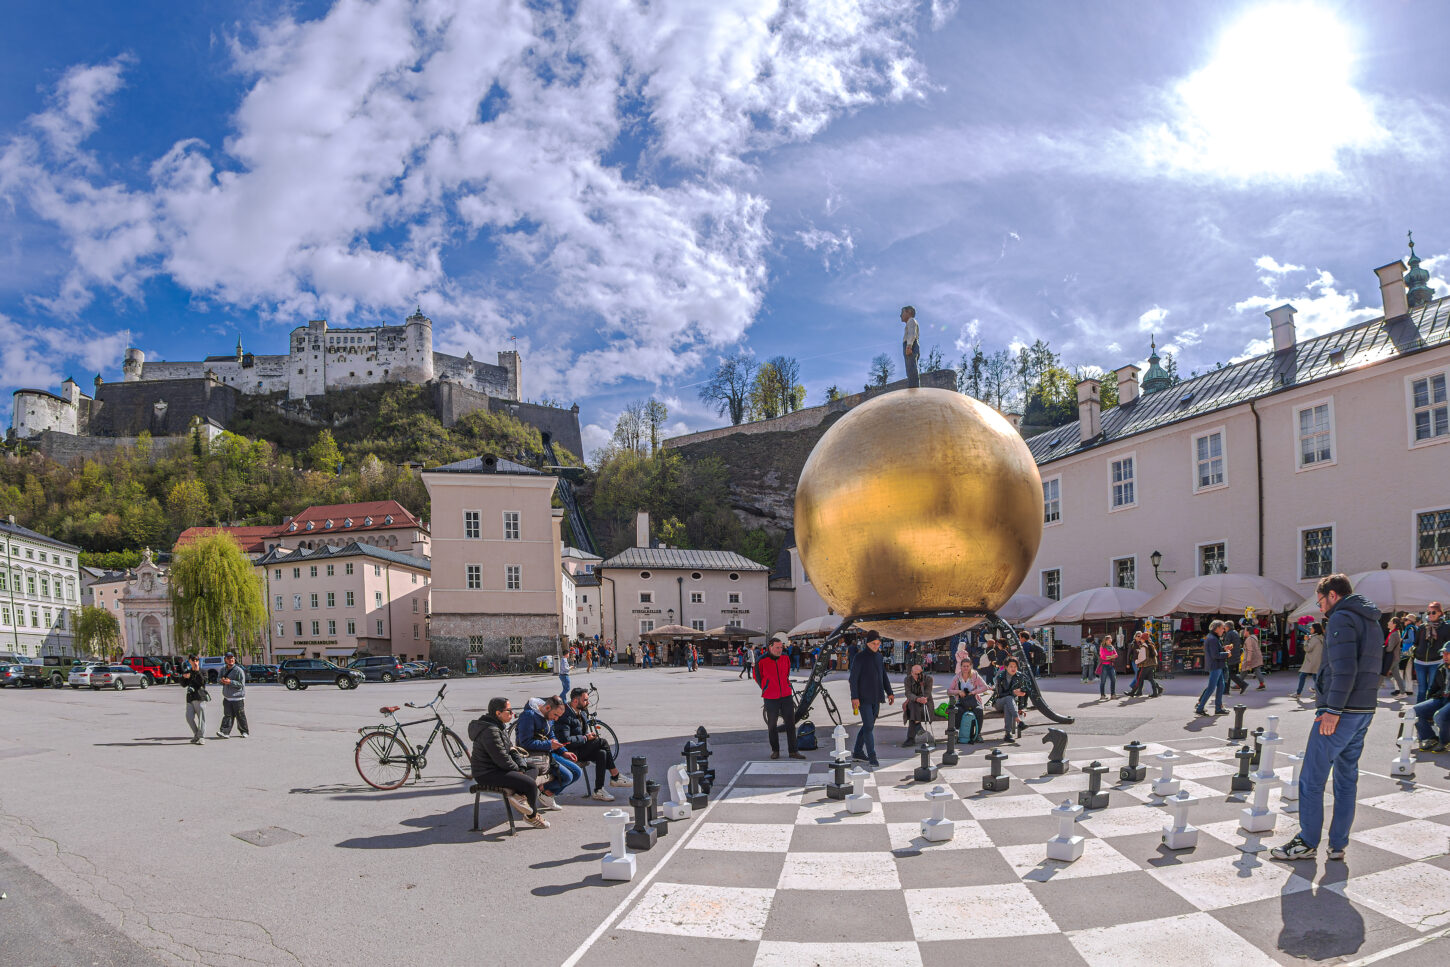 People playing a chess game drawn on asphalt in Kapitelplatz, near monument to Paul Fuerst "Sphere", a golden ball on which stands a small man. Castle Hohensalzburg in background.